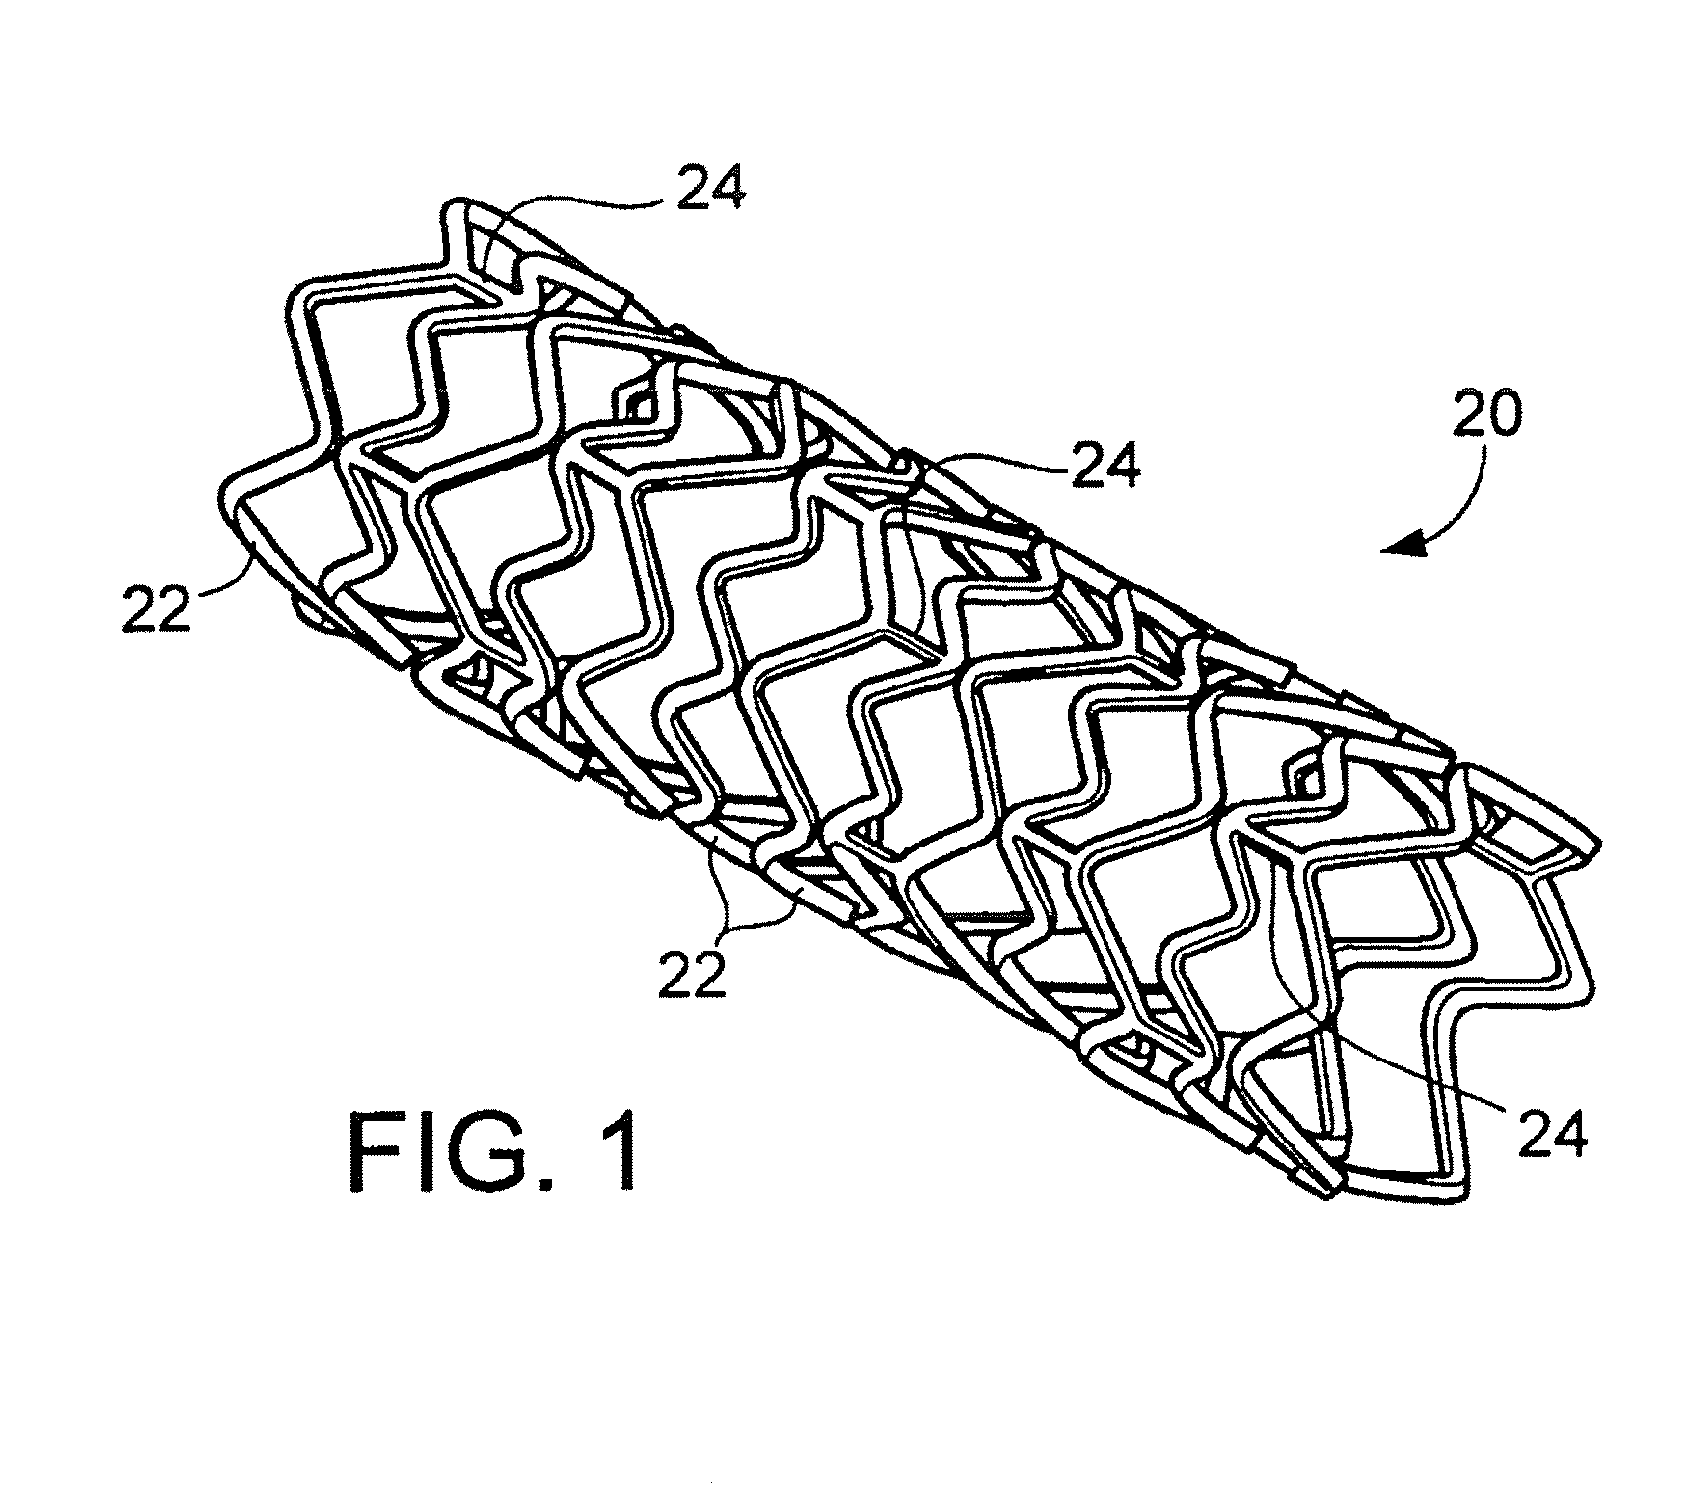 Stents with ceramic drug reservoir layer and methods of making and using the same